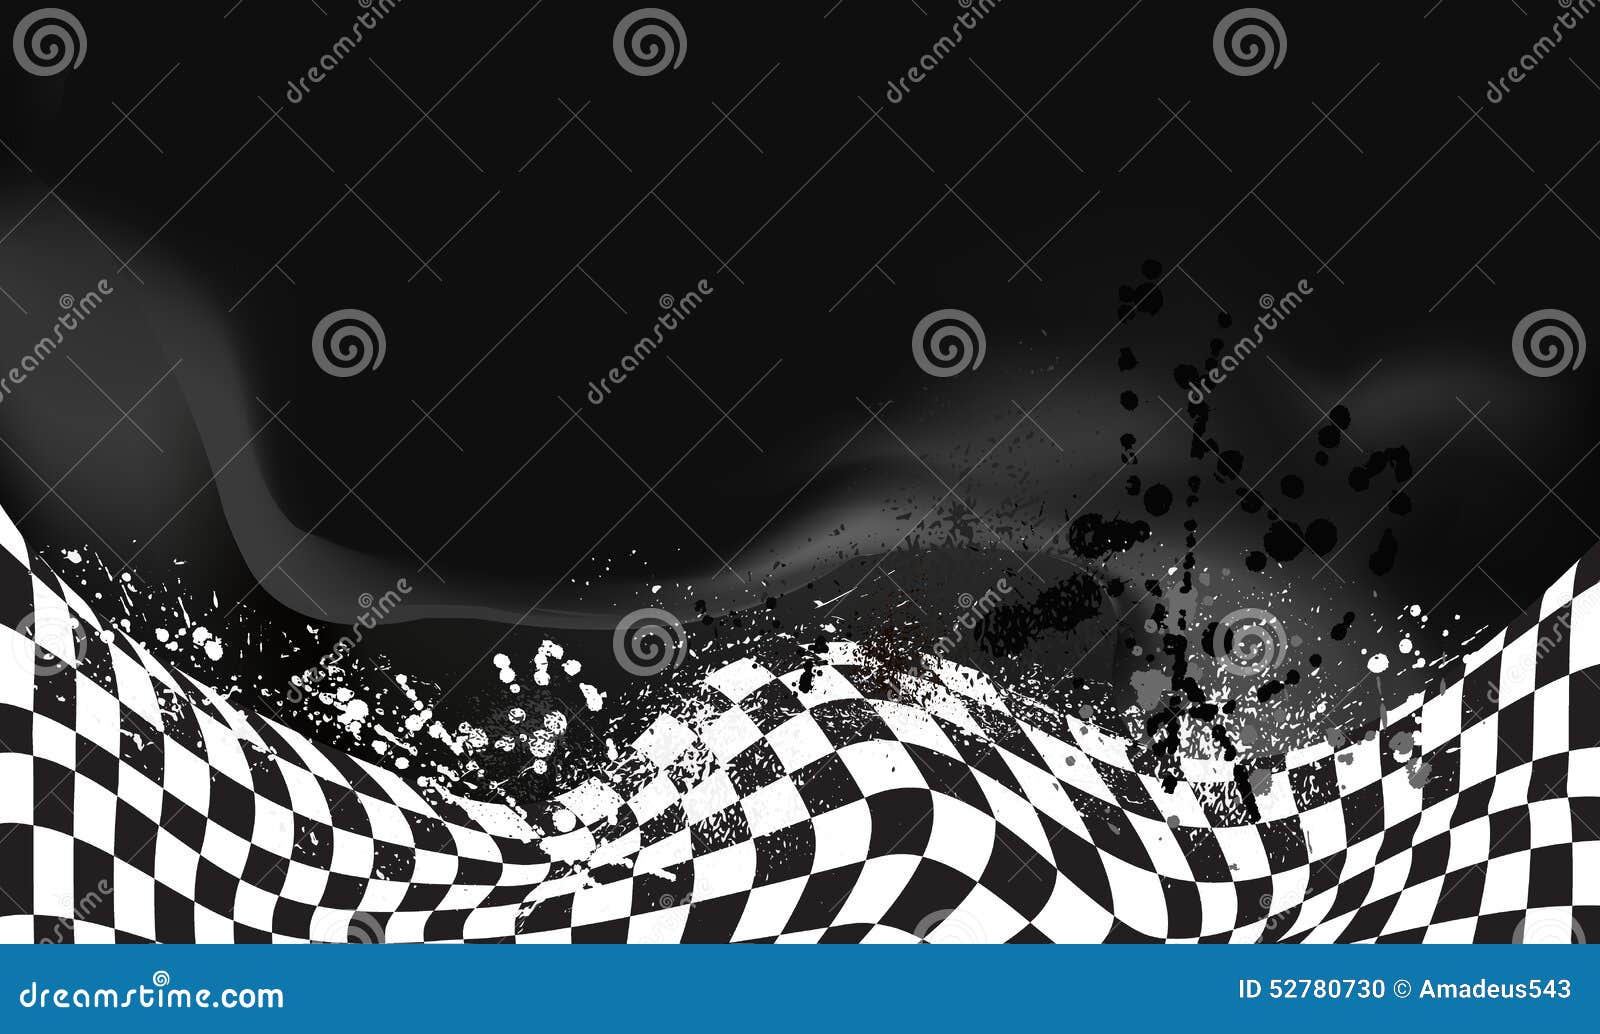 race, checkered flag background